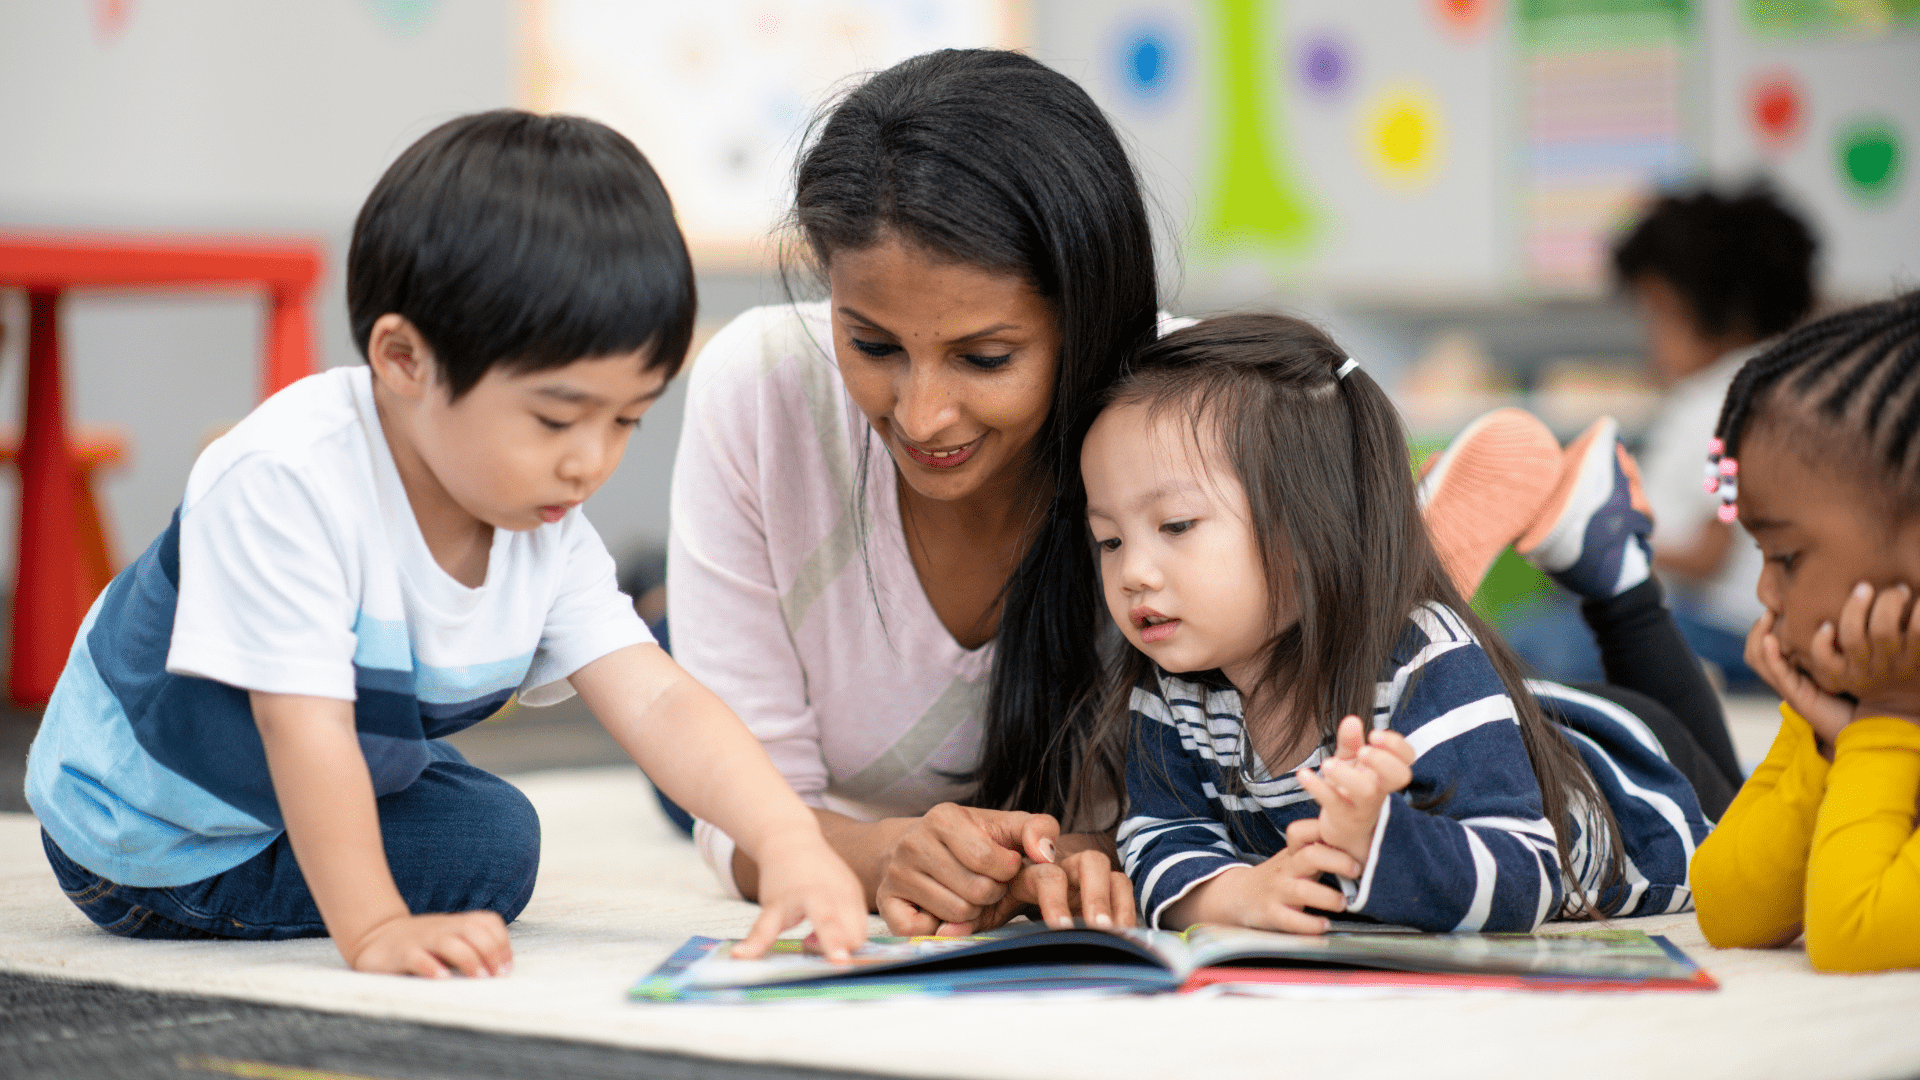 investing in early educators stipend program